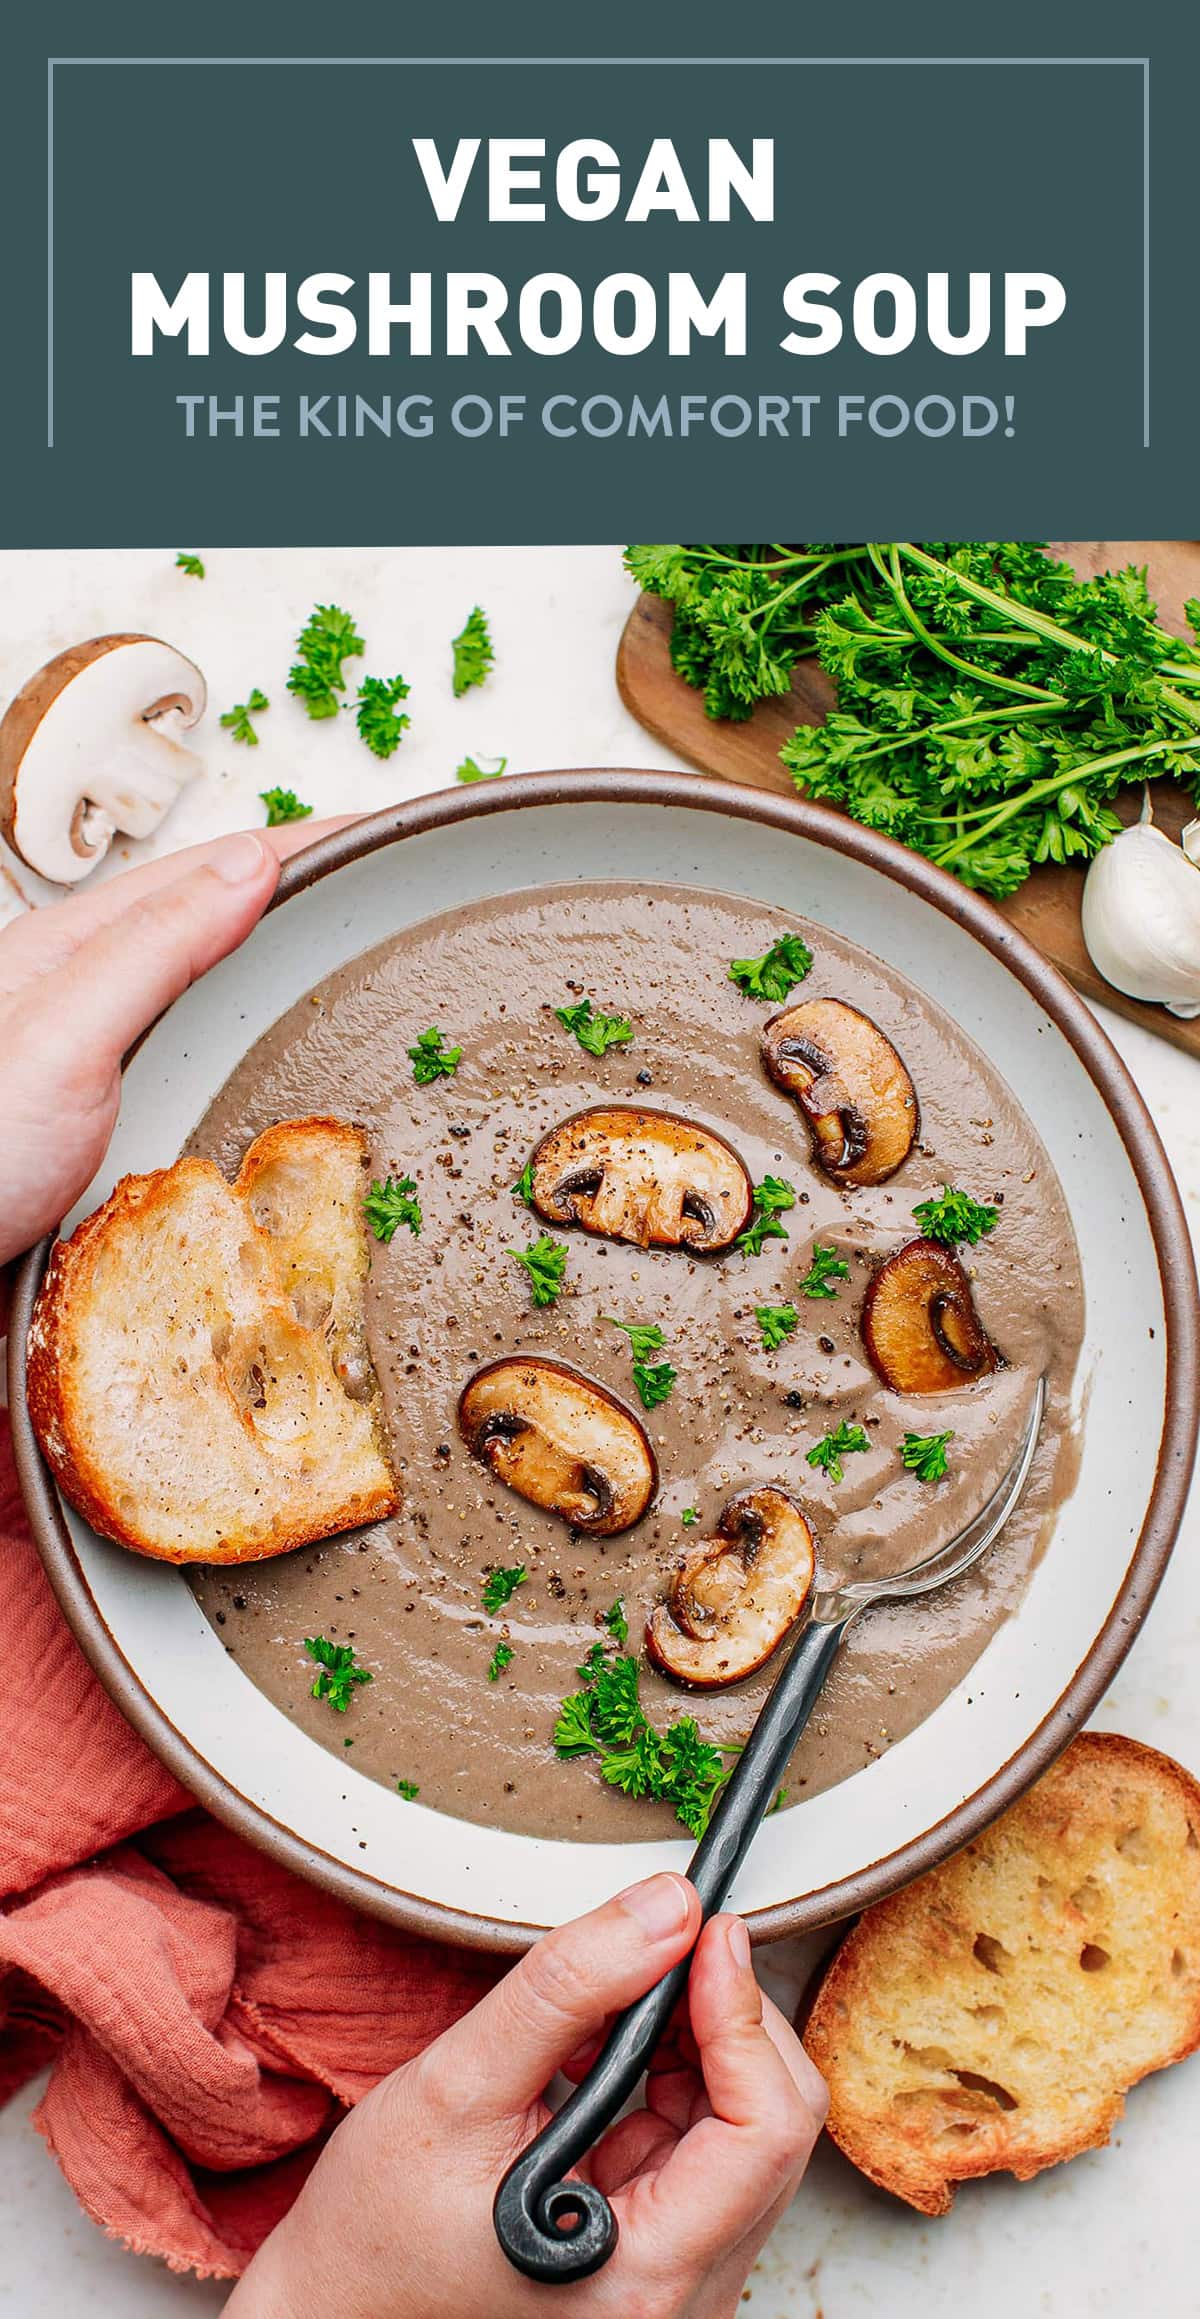 Introducing the heartiest vegan mushroom soup! With its velvety smooth texture, rustic appearance, and rich umami flavor, this cream of mushroom is the king of comfort food. Serve it with toasted bread or croutons for a cozy Winter meal! #vegan #mushroomsoup #comfortfood